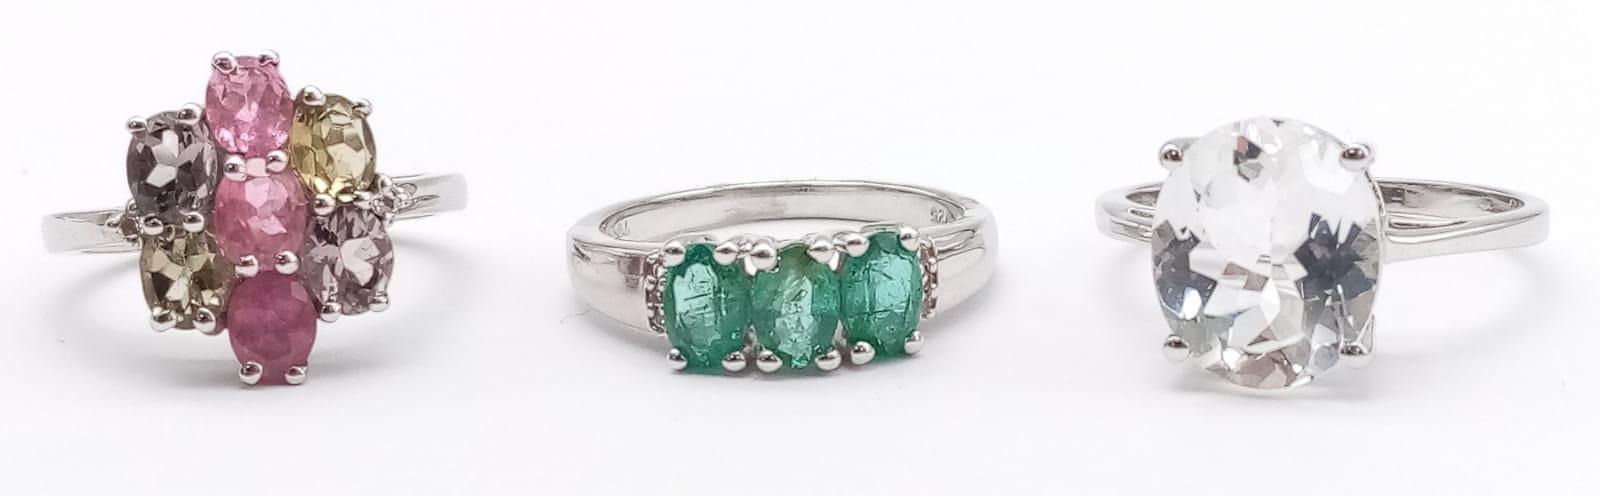 Three 925 Sterling Silver Gemstone Rings: Tourmaline - Size N, Topaz - Size S and Emerald - Size P.